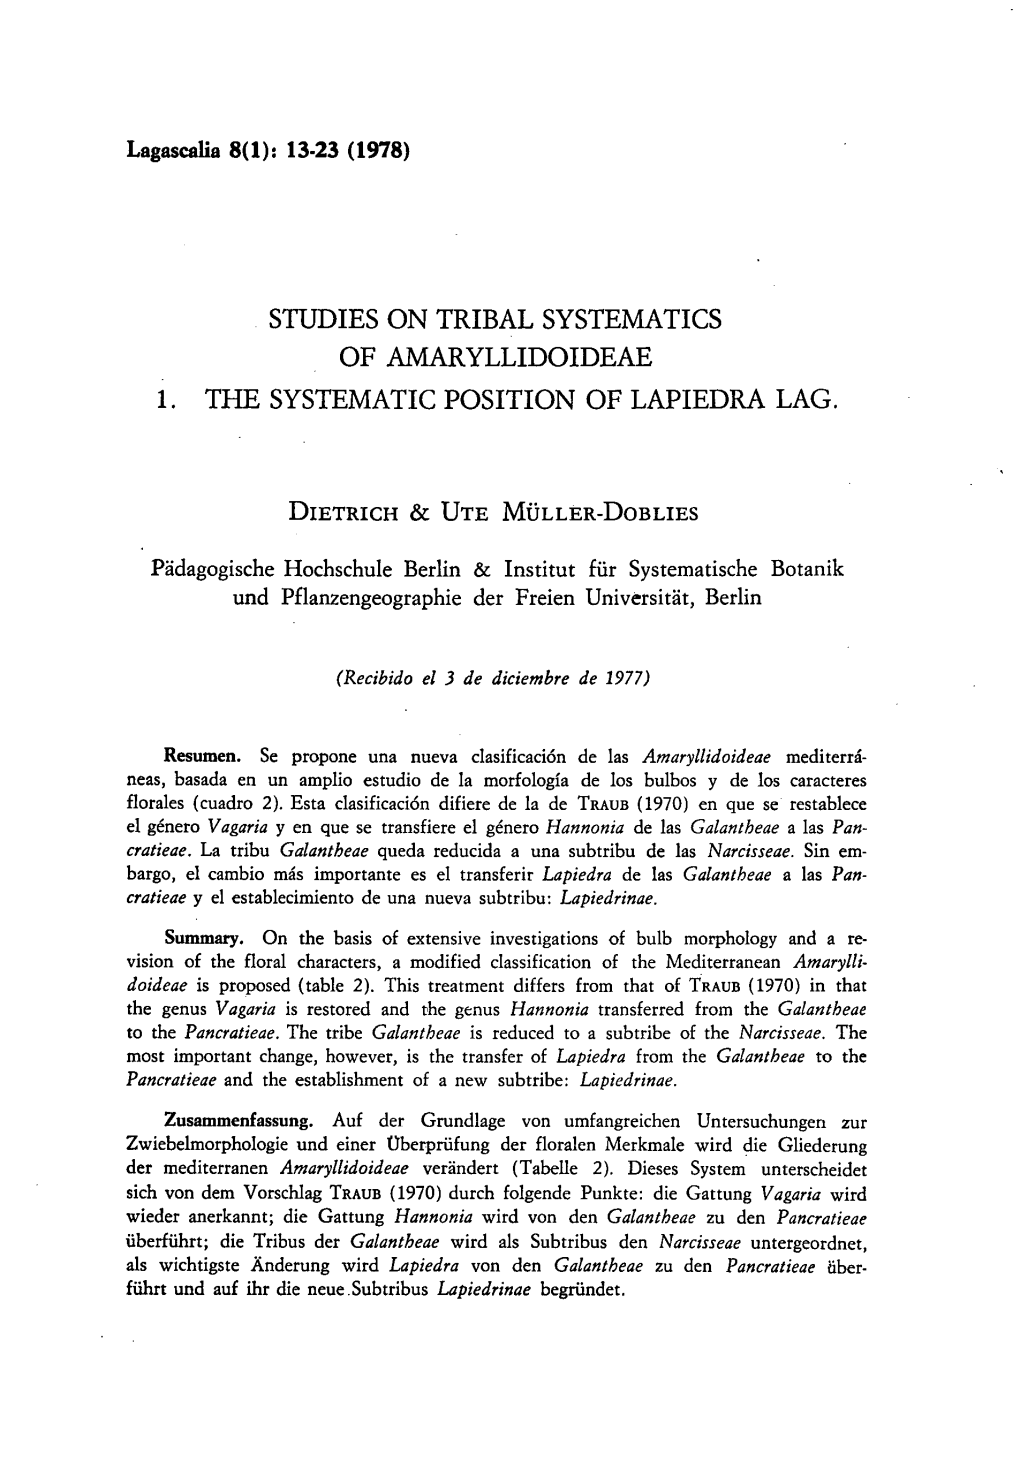 Studies on Tribal Systematics of Amaryllidoideae 1. Tete Systematic Position of Lapiedra Lag